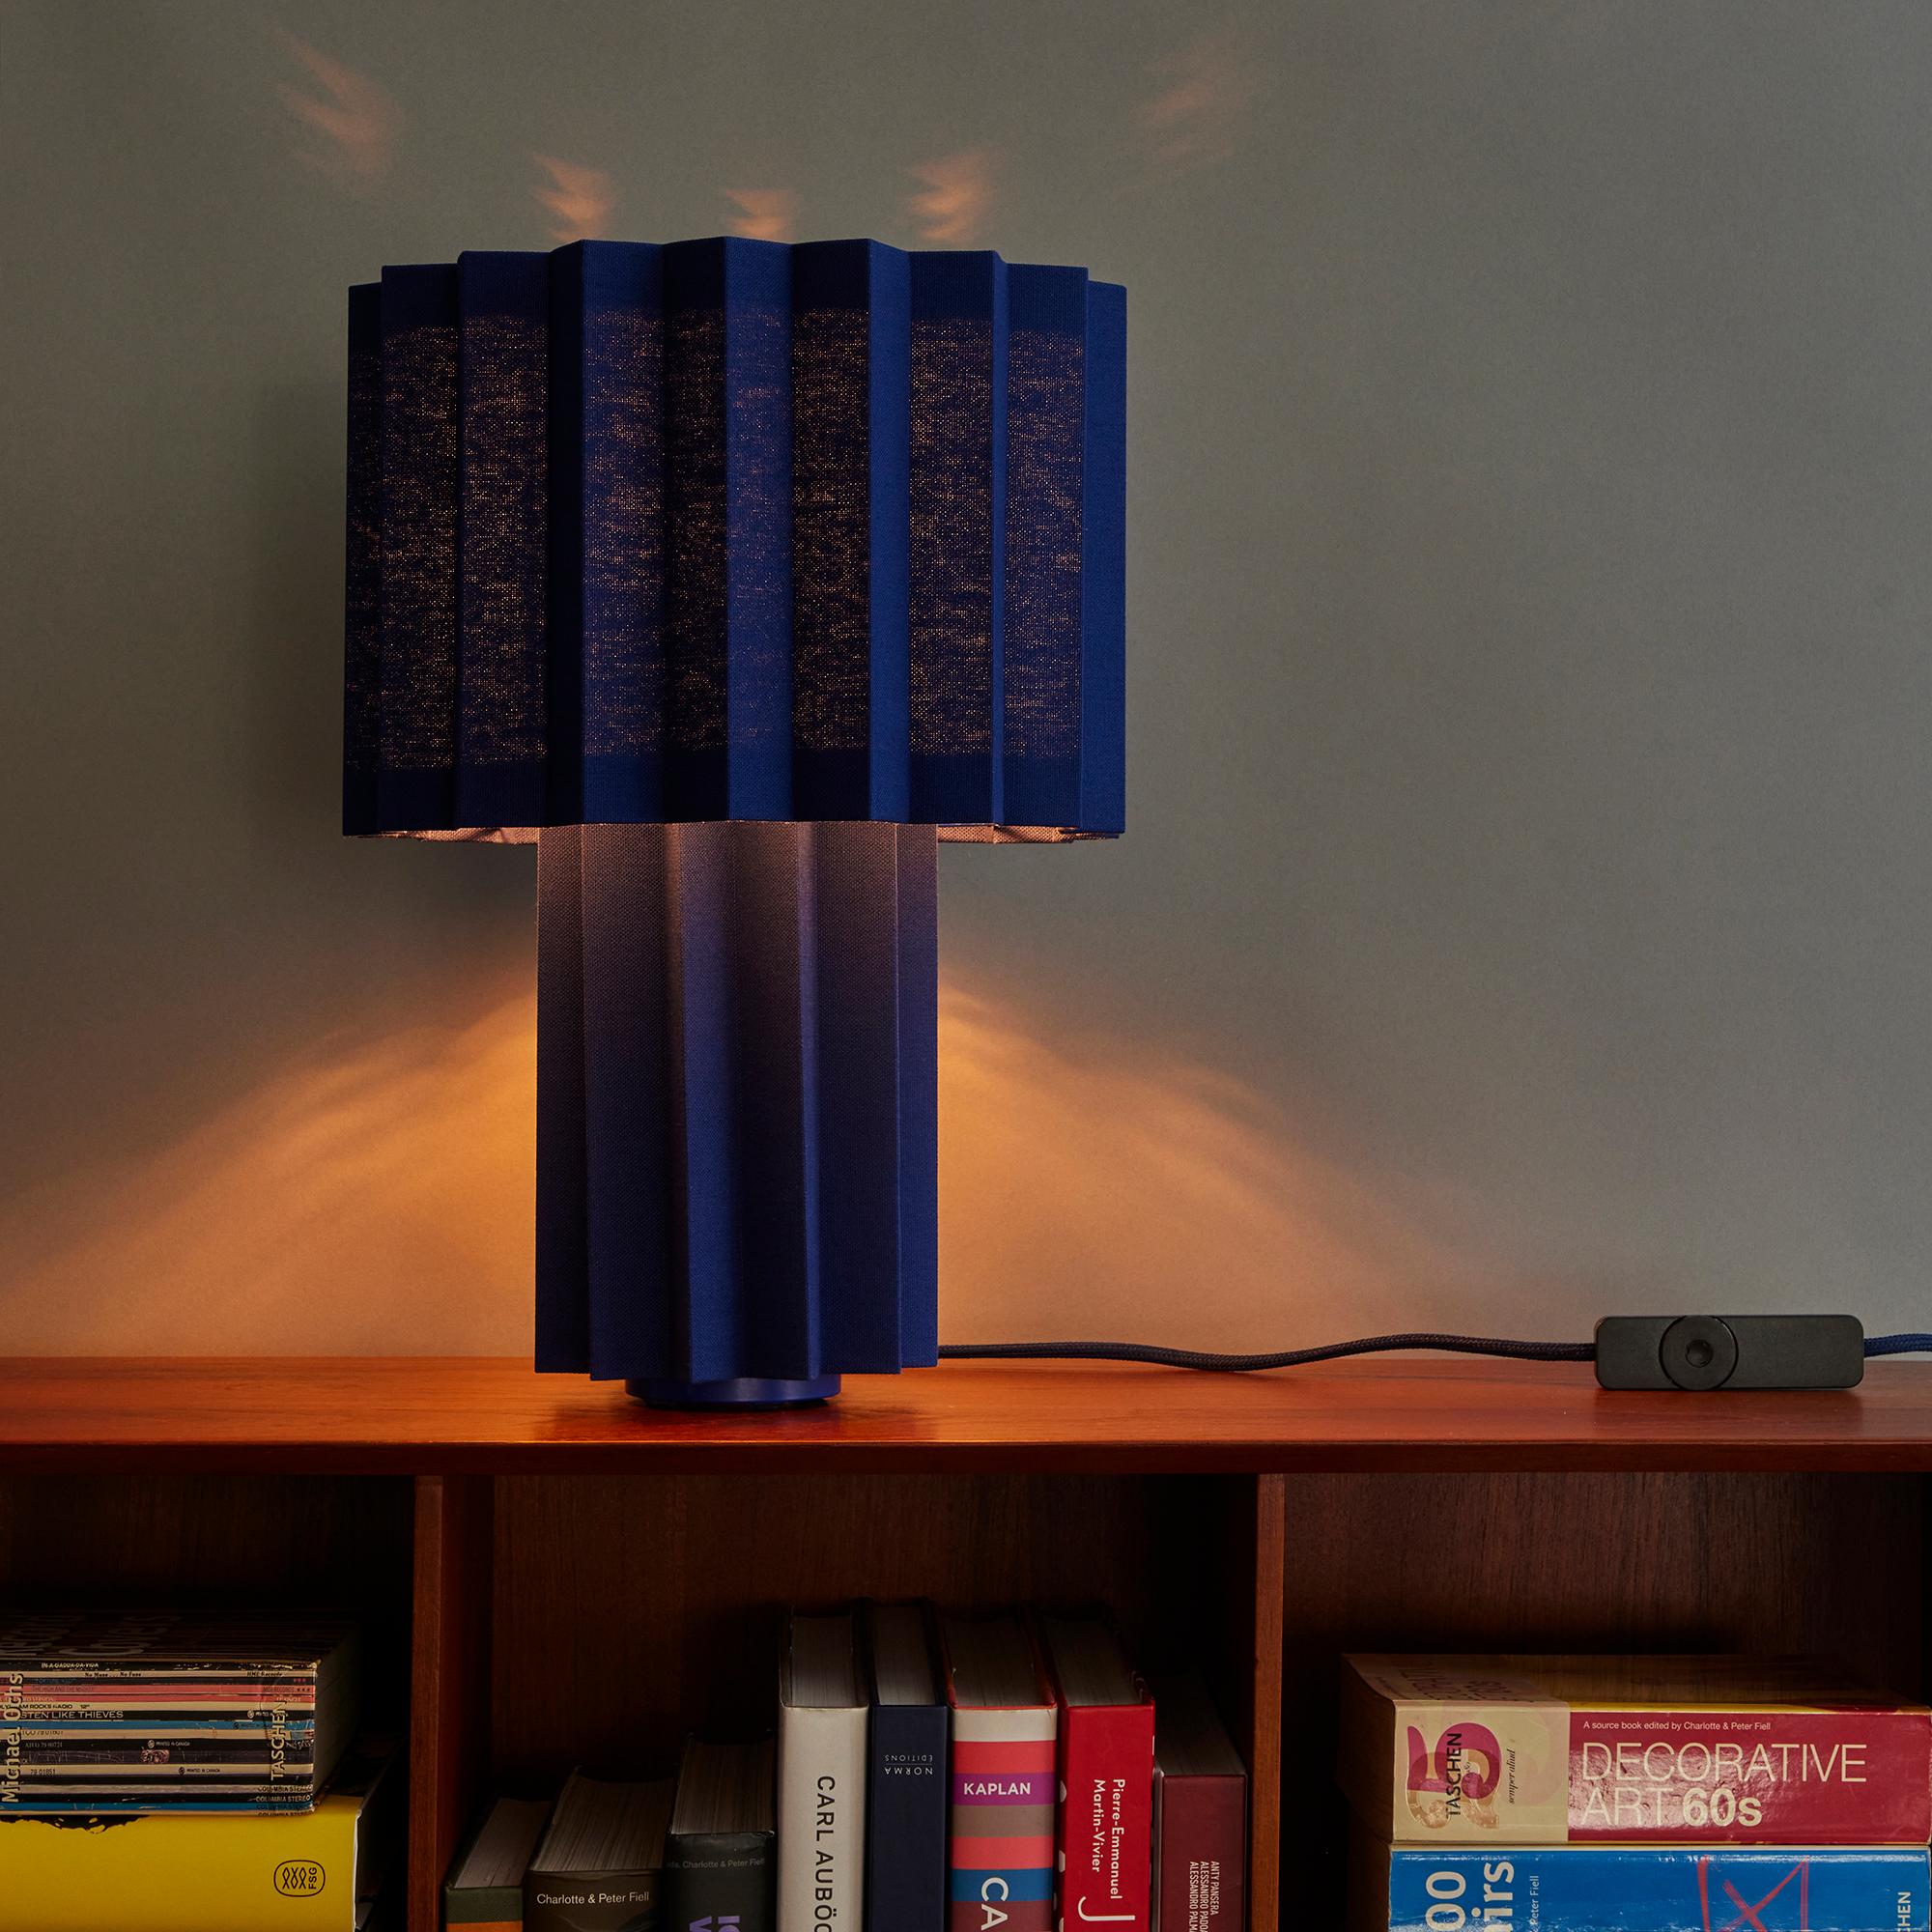 'Plissé Blue Edition' pleated textile table lamp by Folkform for Örsjö.

This unique table lamp was awarded “Lighting of the Year 2022” by Residence Magazine Sweden, who called it “a sophisticated jewel of light that brings the somewhat neglected